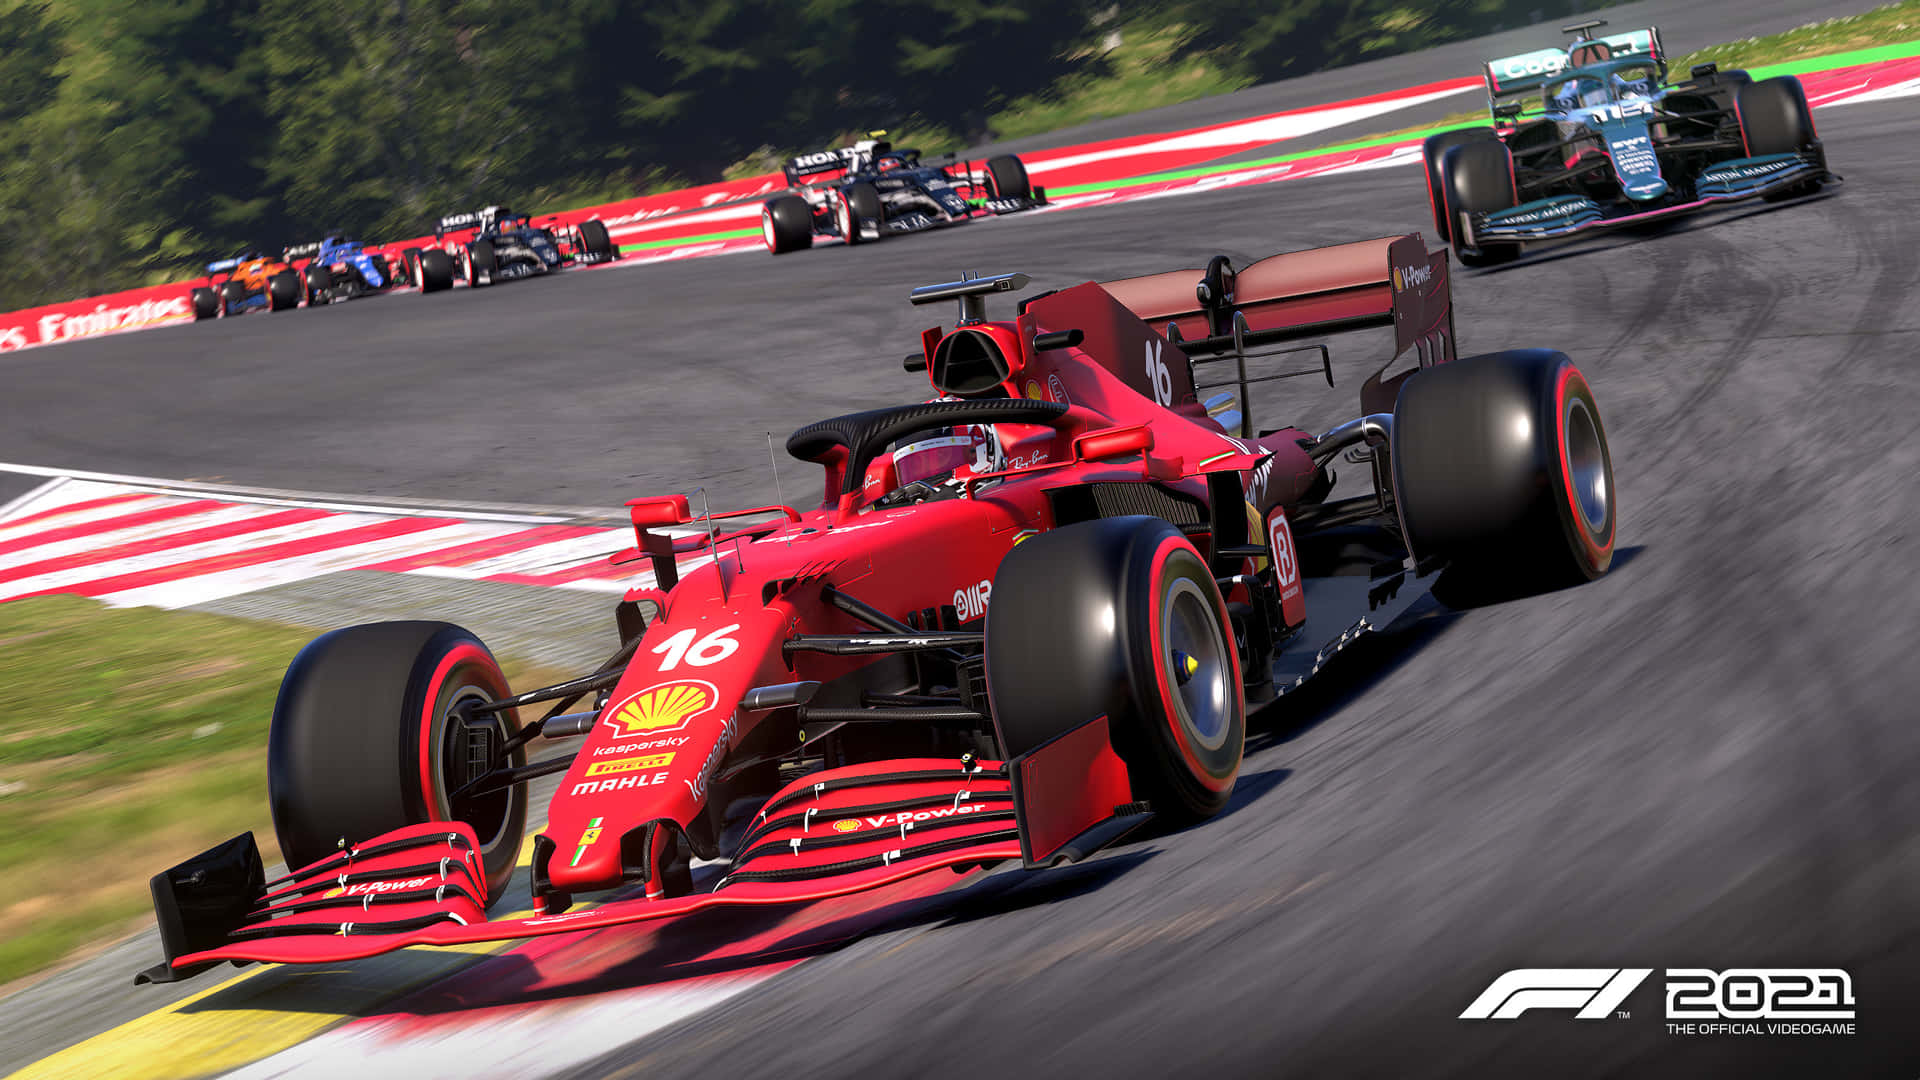 Get ready for intense racing action with F1 game Wallpaper